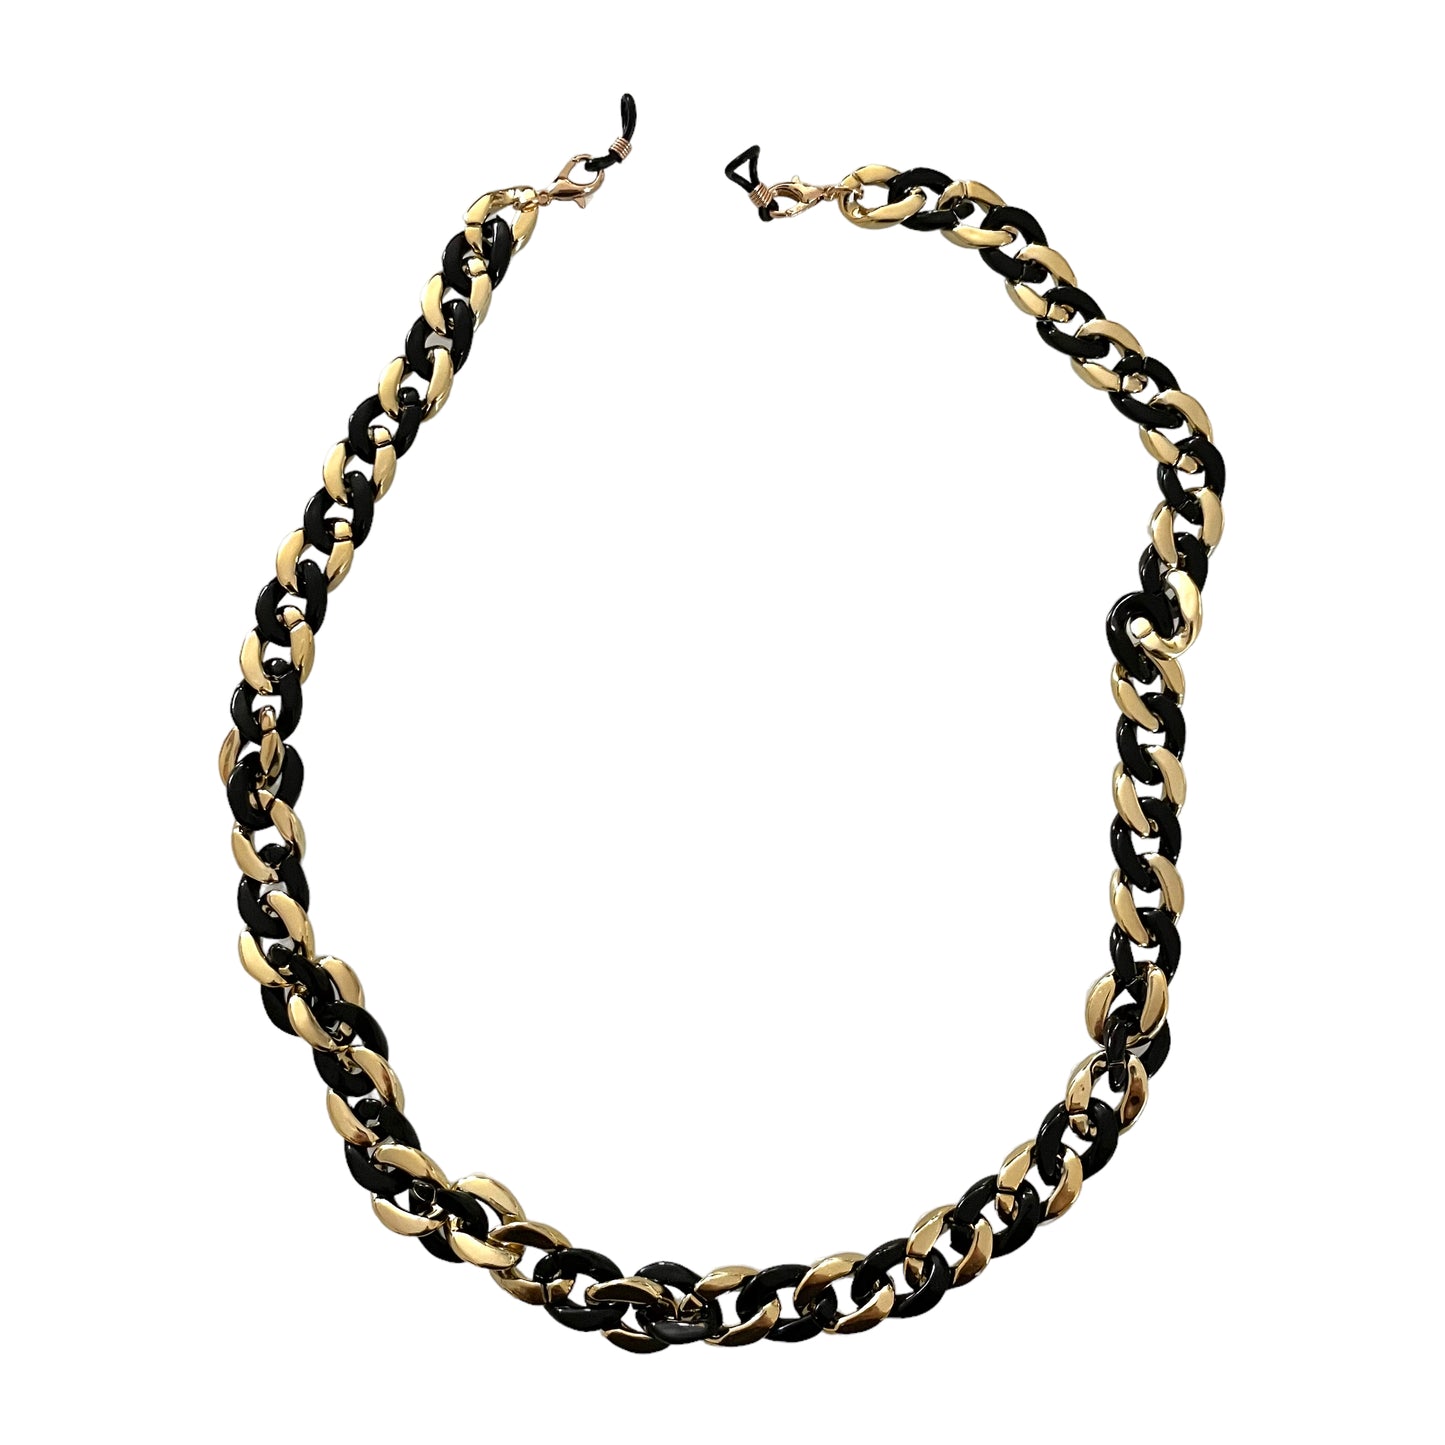 Layla Recycled Plastic Sunglasses Chain And Necklace- 2 in 1 - Black And Gold